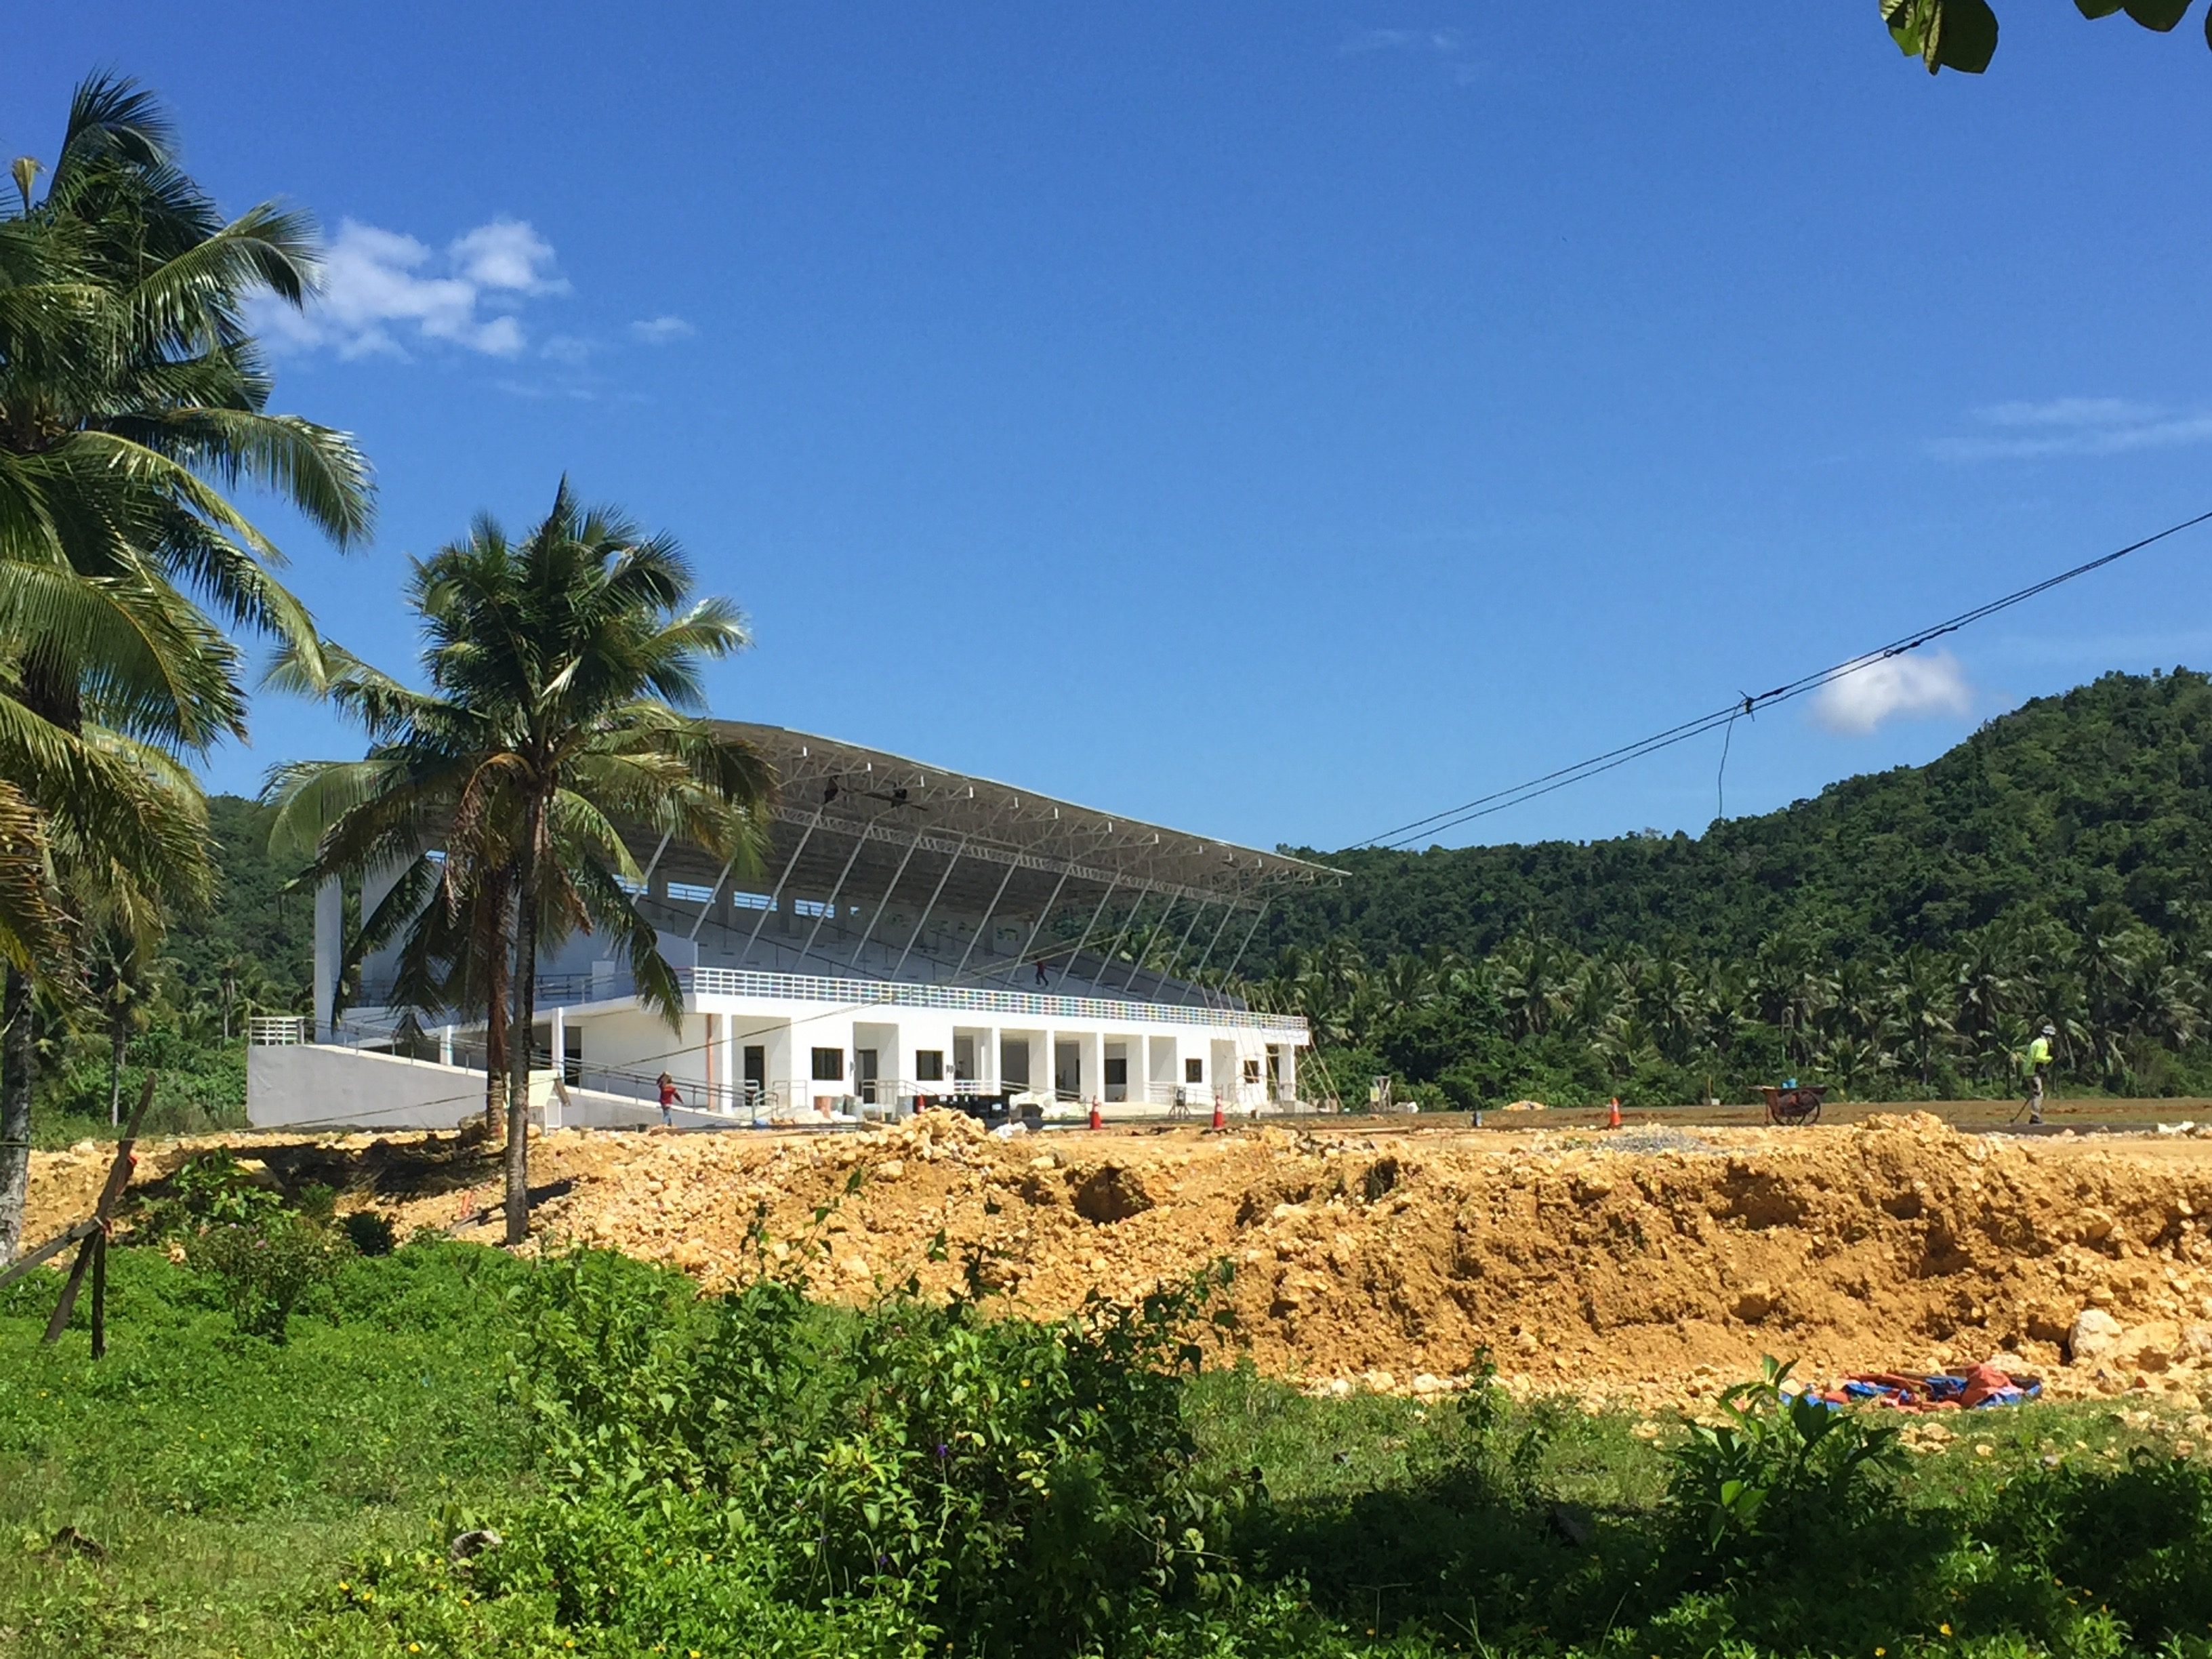 SPORTS COMPLEX. Part of the budget for infrastructure in Surigao del Norte is allocated for the construction of this sports complex in Dapa  